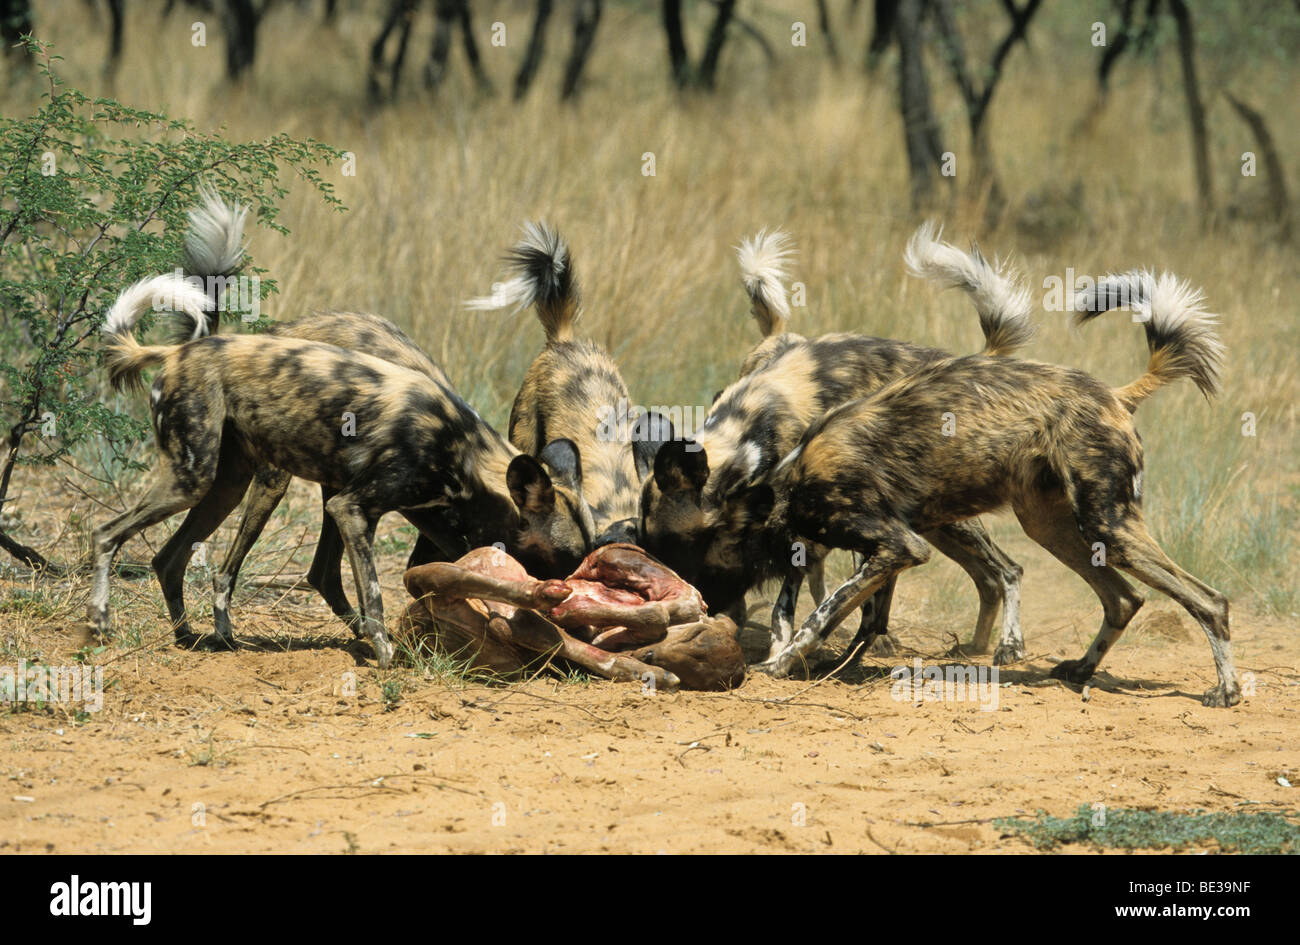 African wild dogs (Lycaon pictus), Namibia, Africa Stock Photo